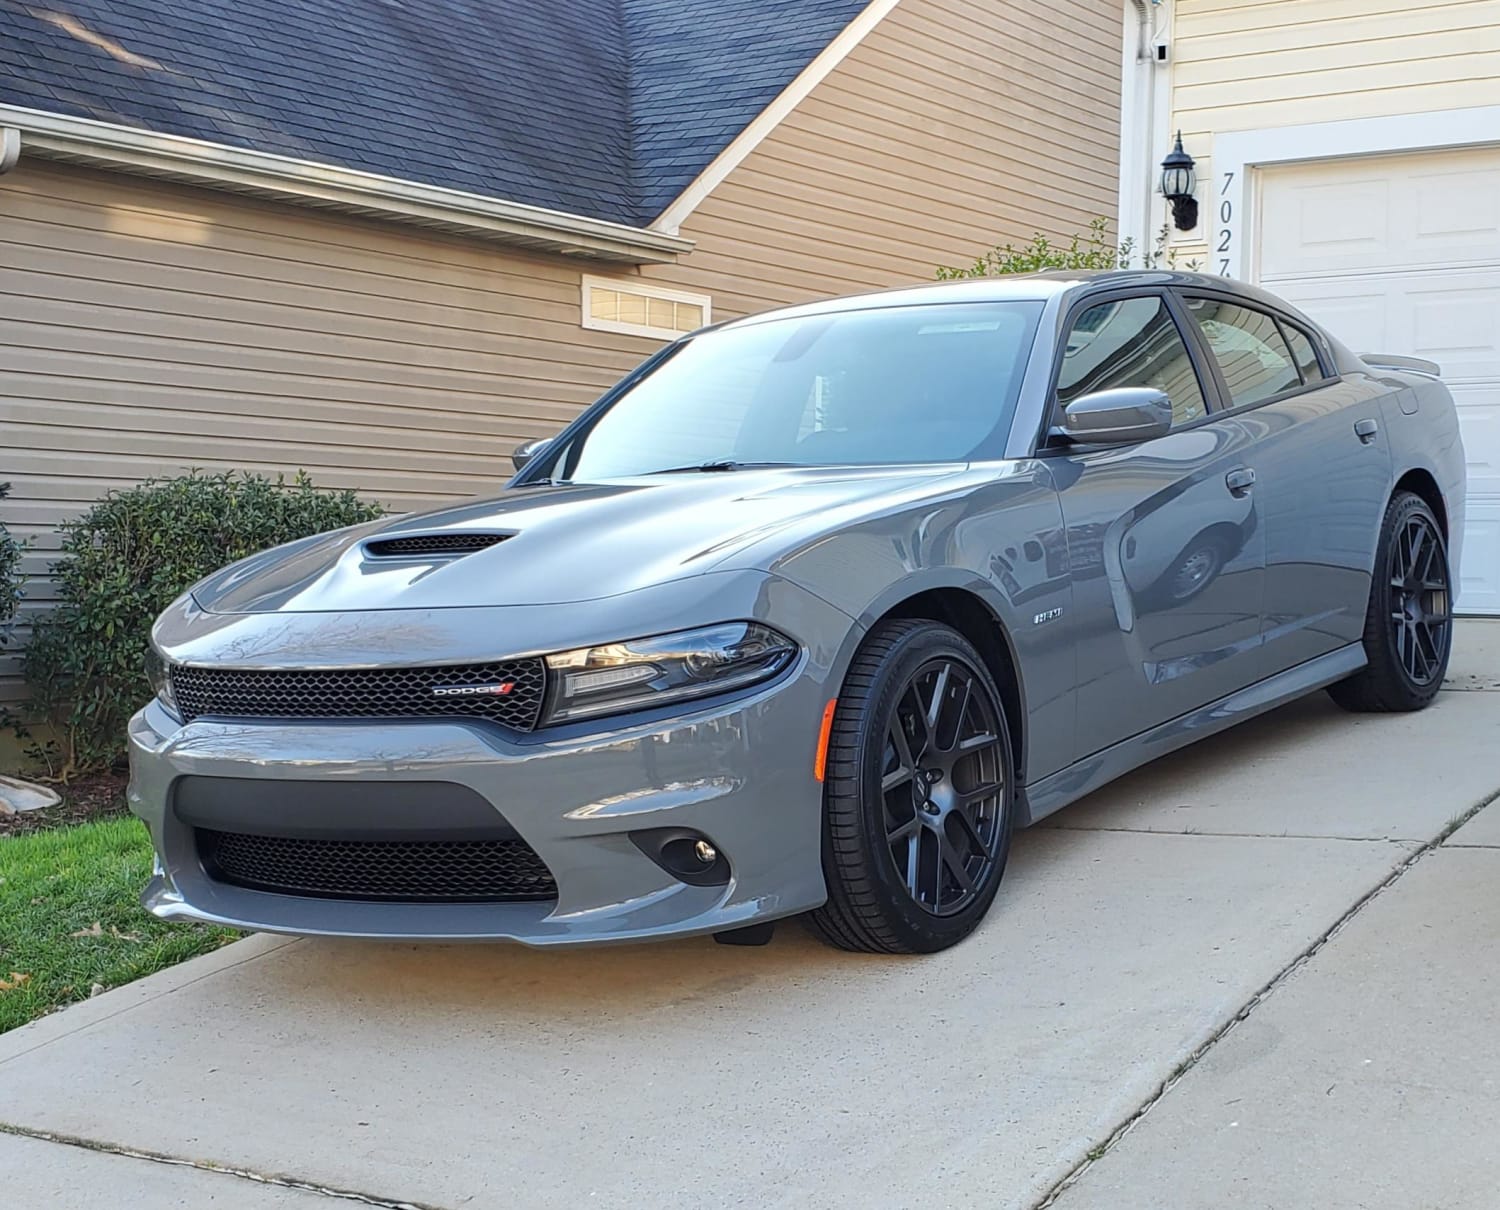 She isn't quite what I normally see on here but she is my first car over 300 H.P. 2019 Dodge Charger R/T in Battleship Grey. Go Navy!